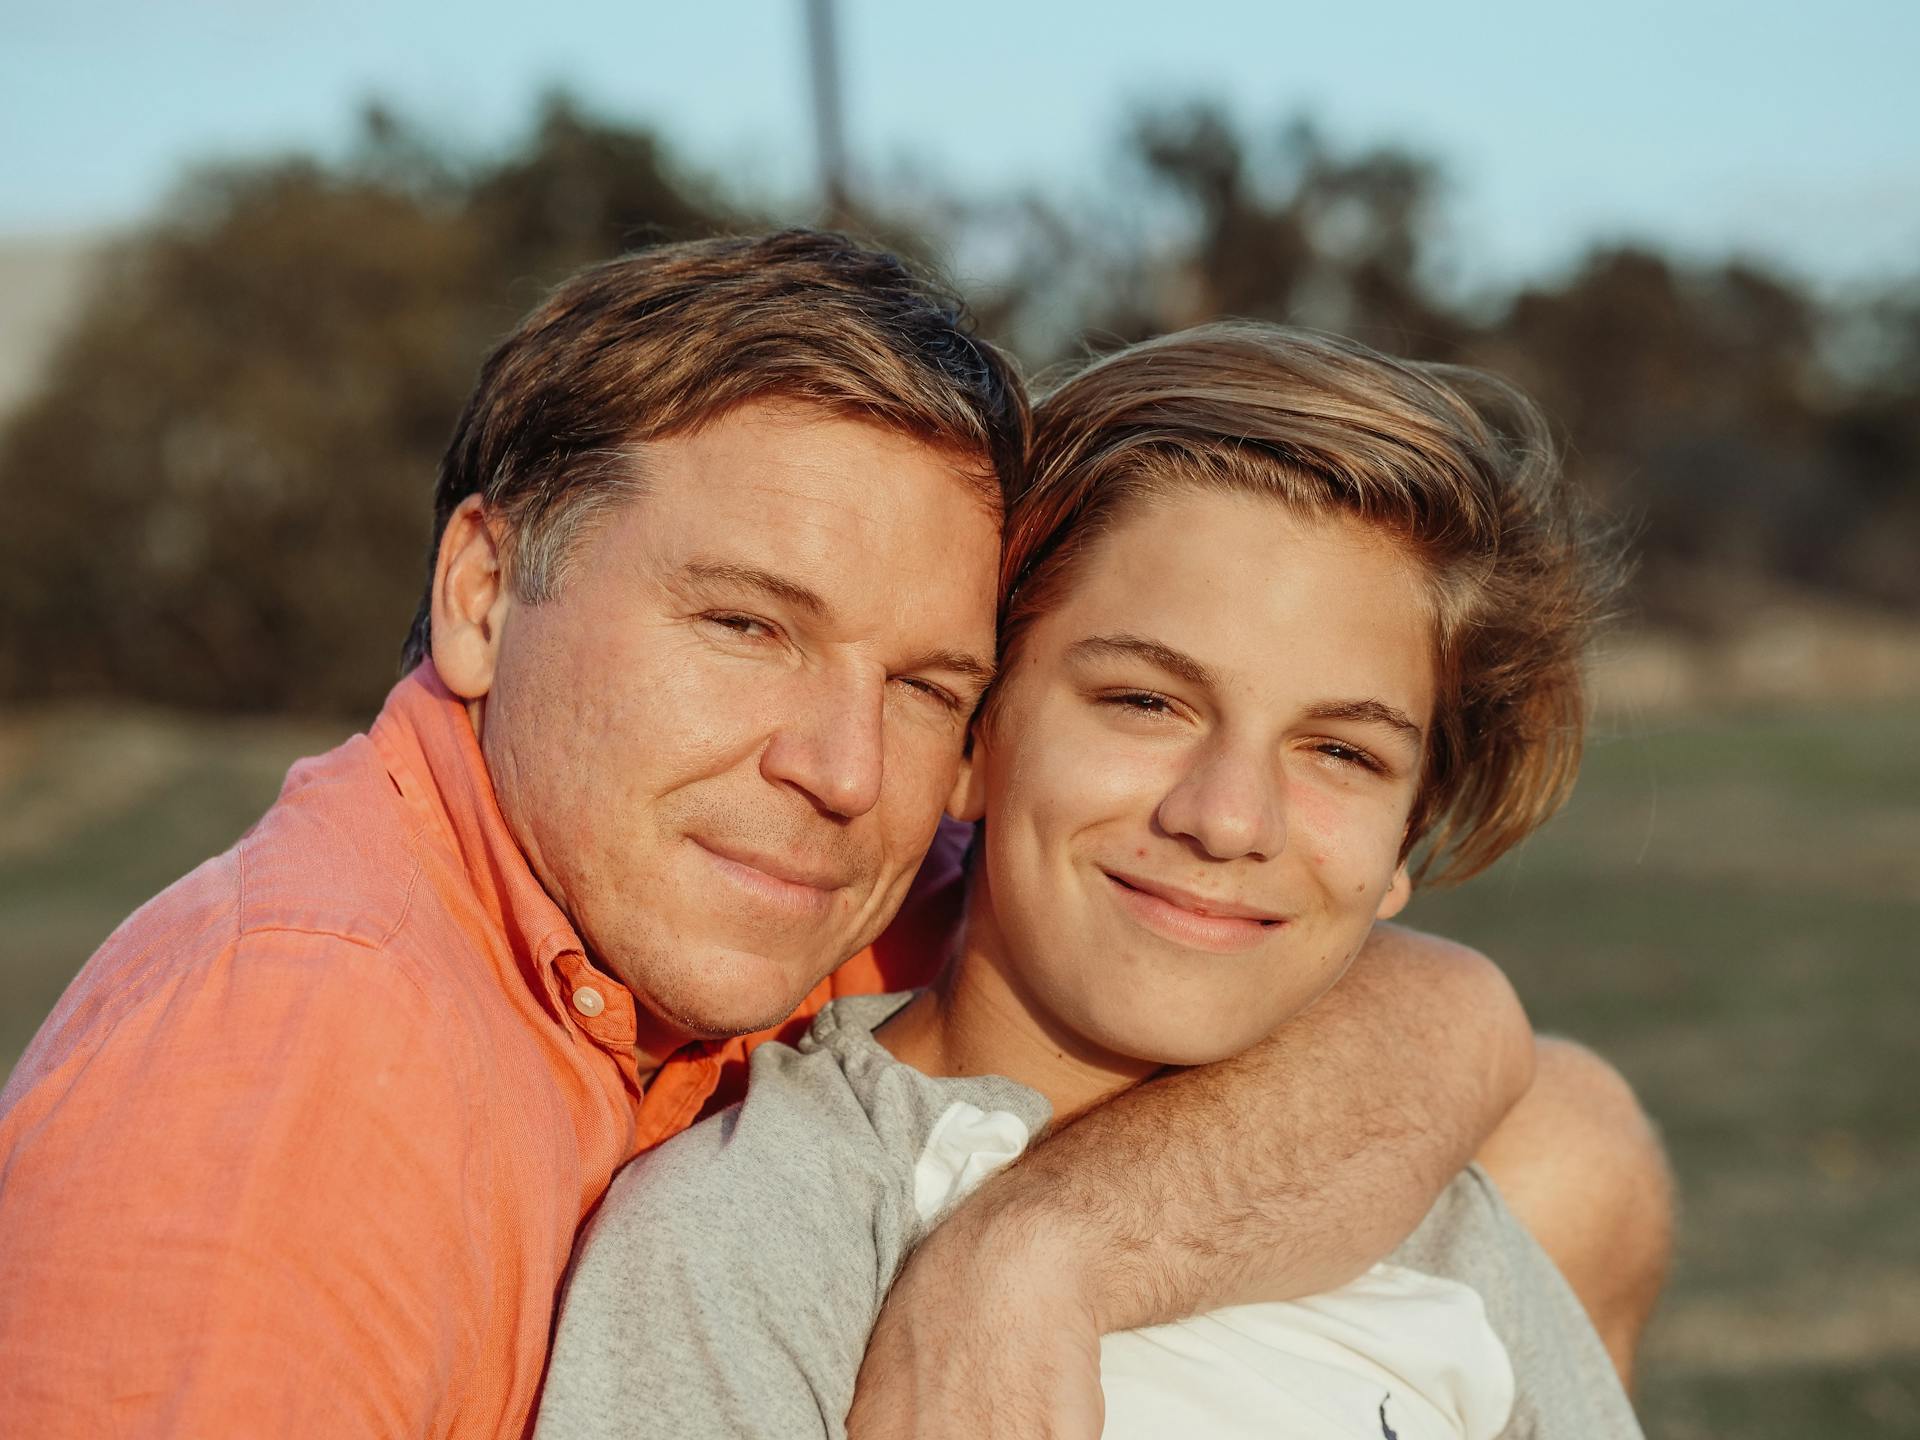 A father posing with his young son | Source: Pexels